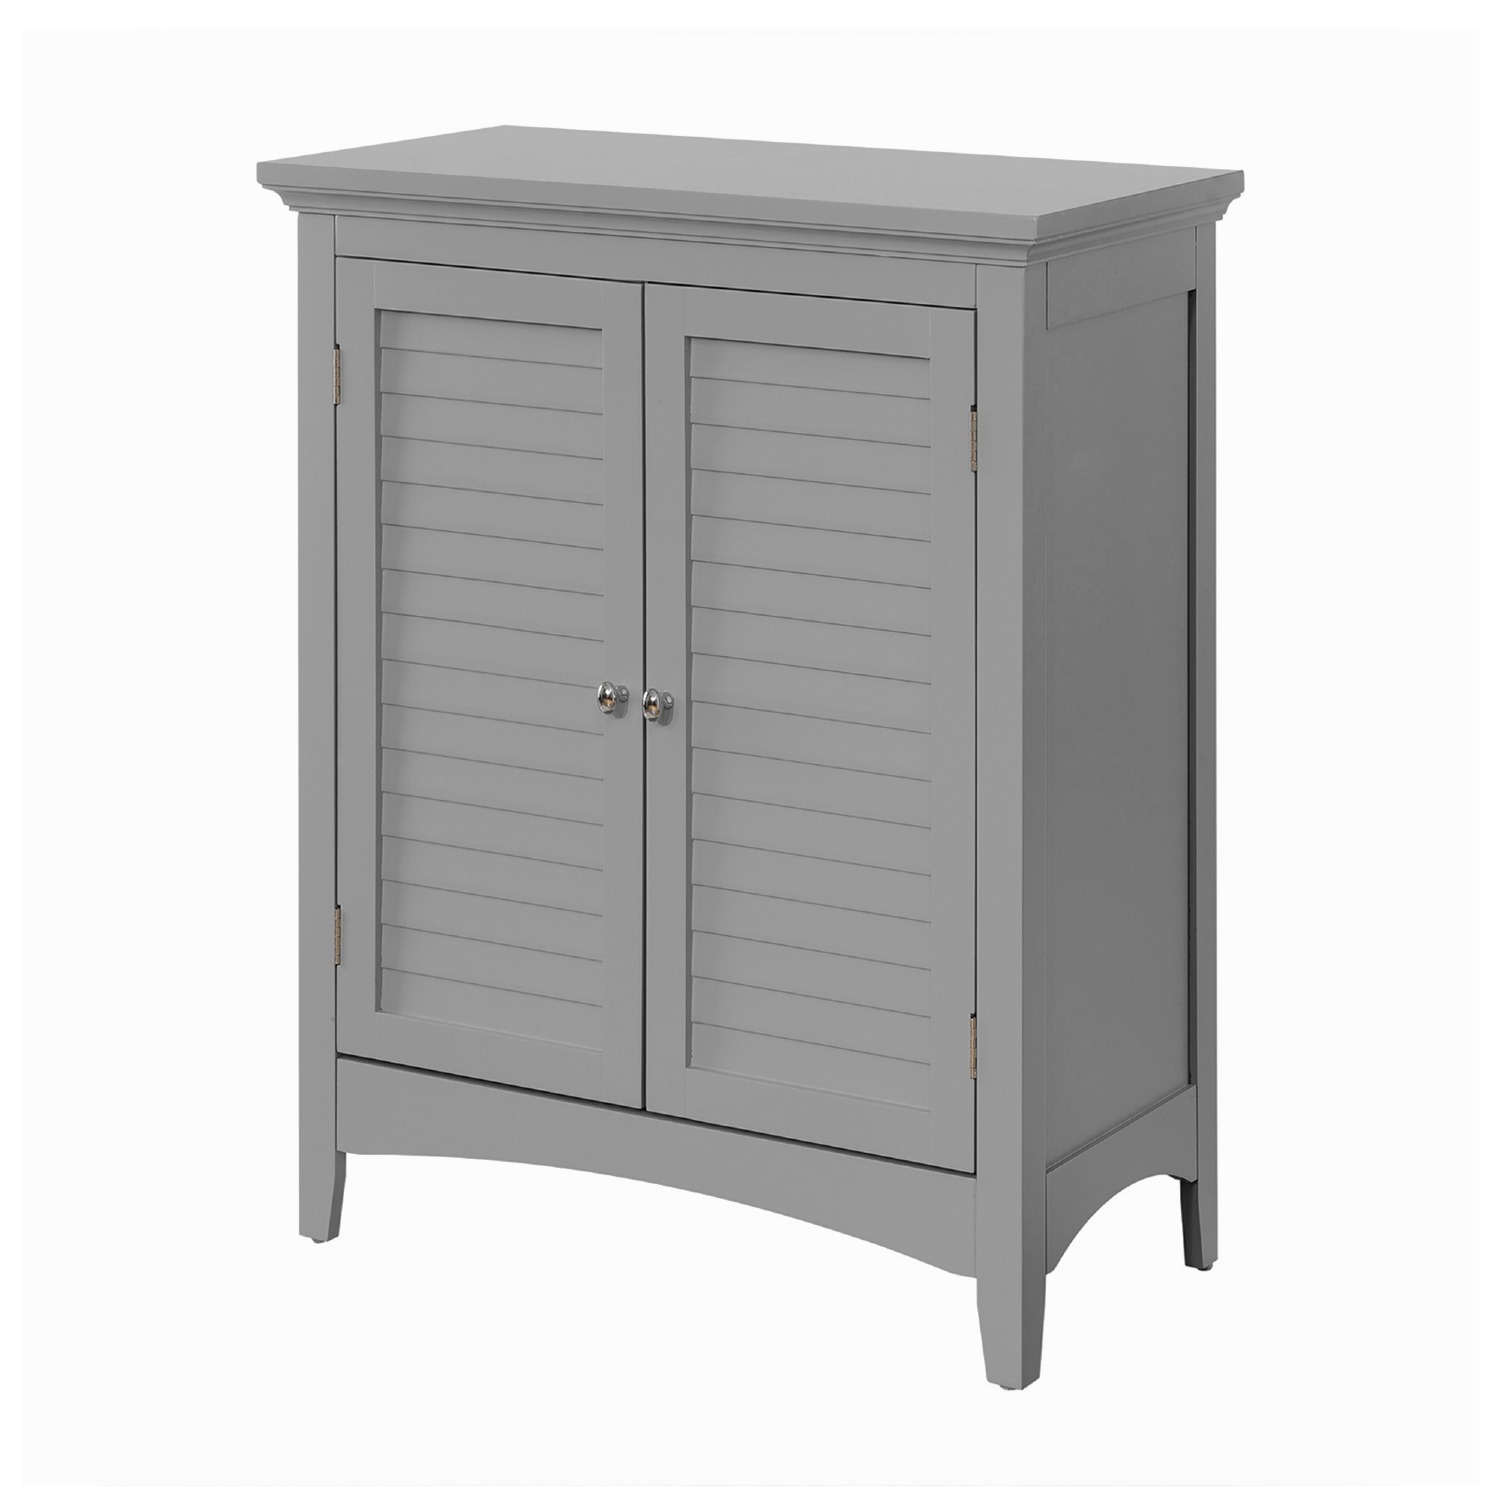 Teamson Home Glancy Wooden Storage Cabinet (Grey) $88.04 + Free Shipping